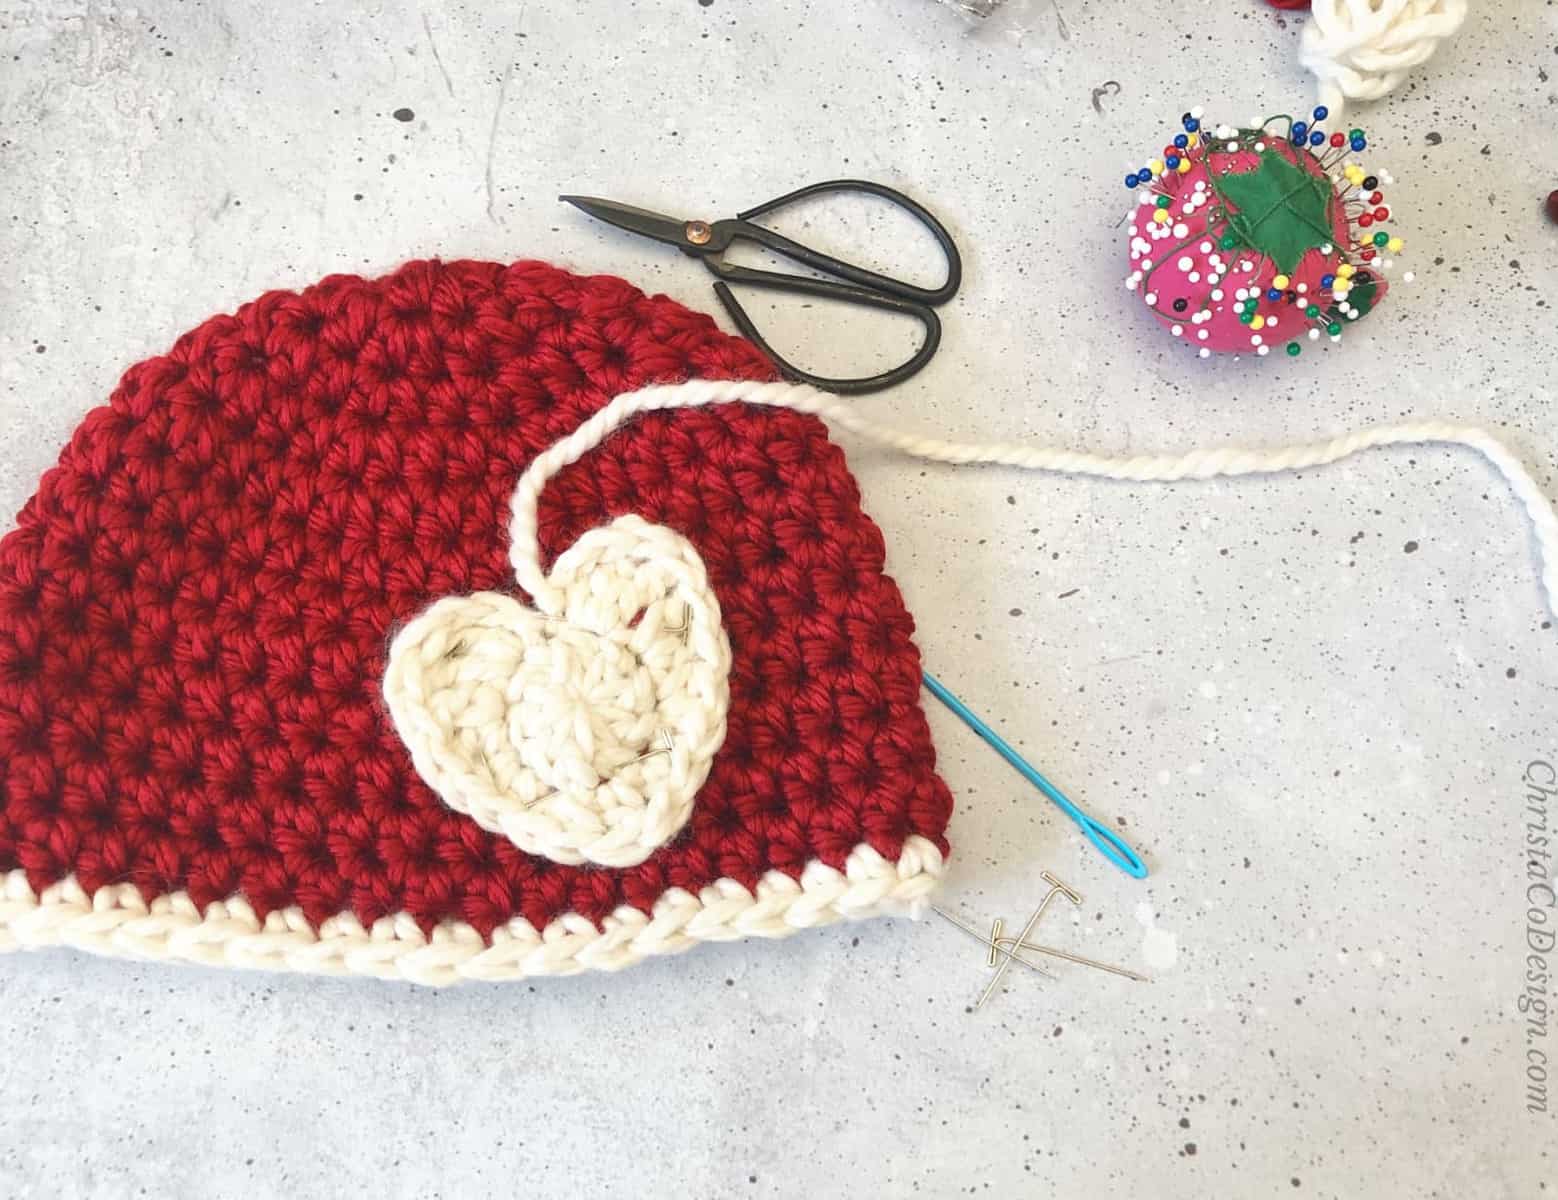 How To Sew On A Crochet Appliqué To Your Hat